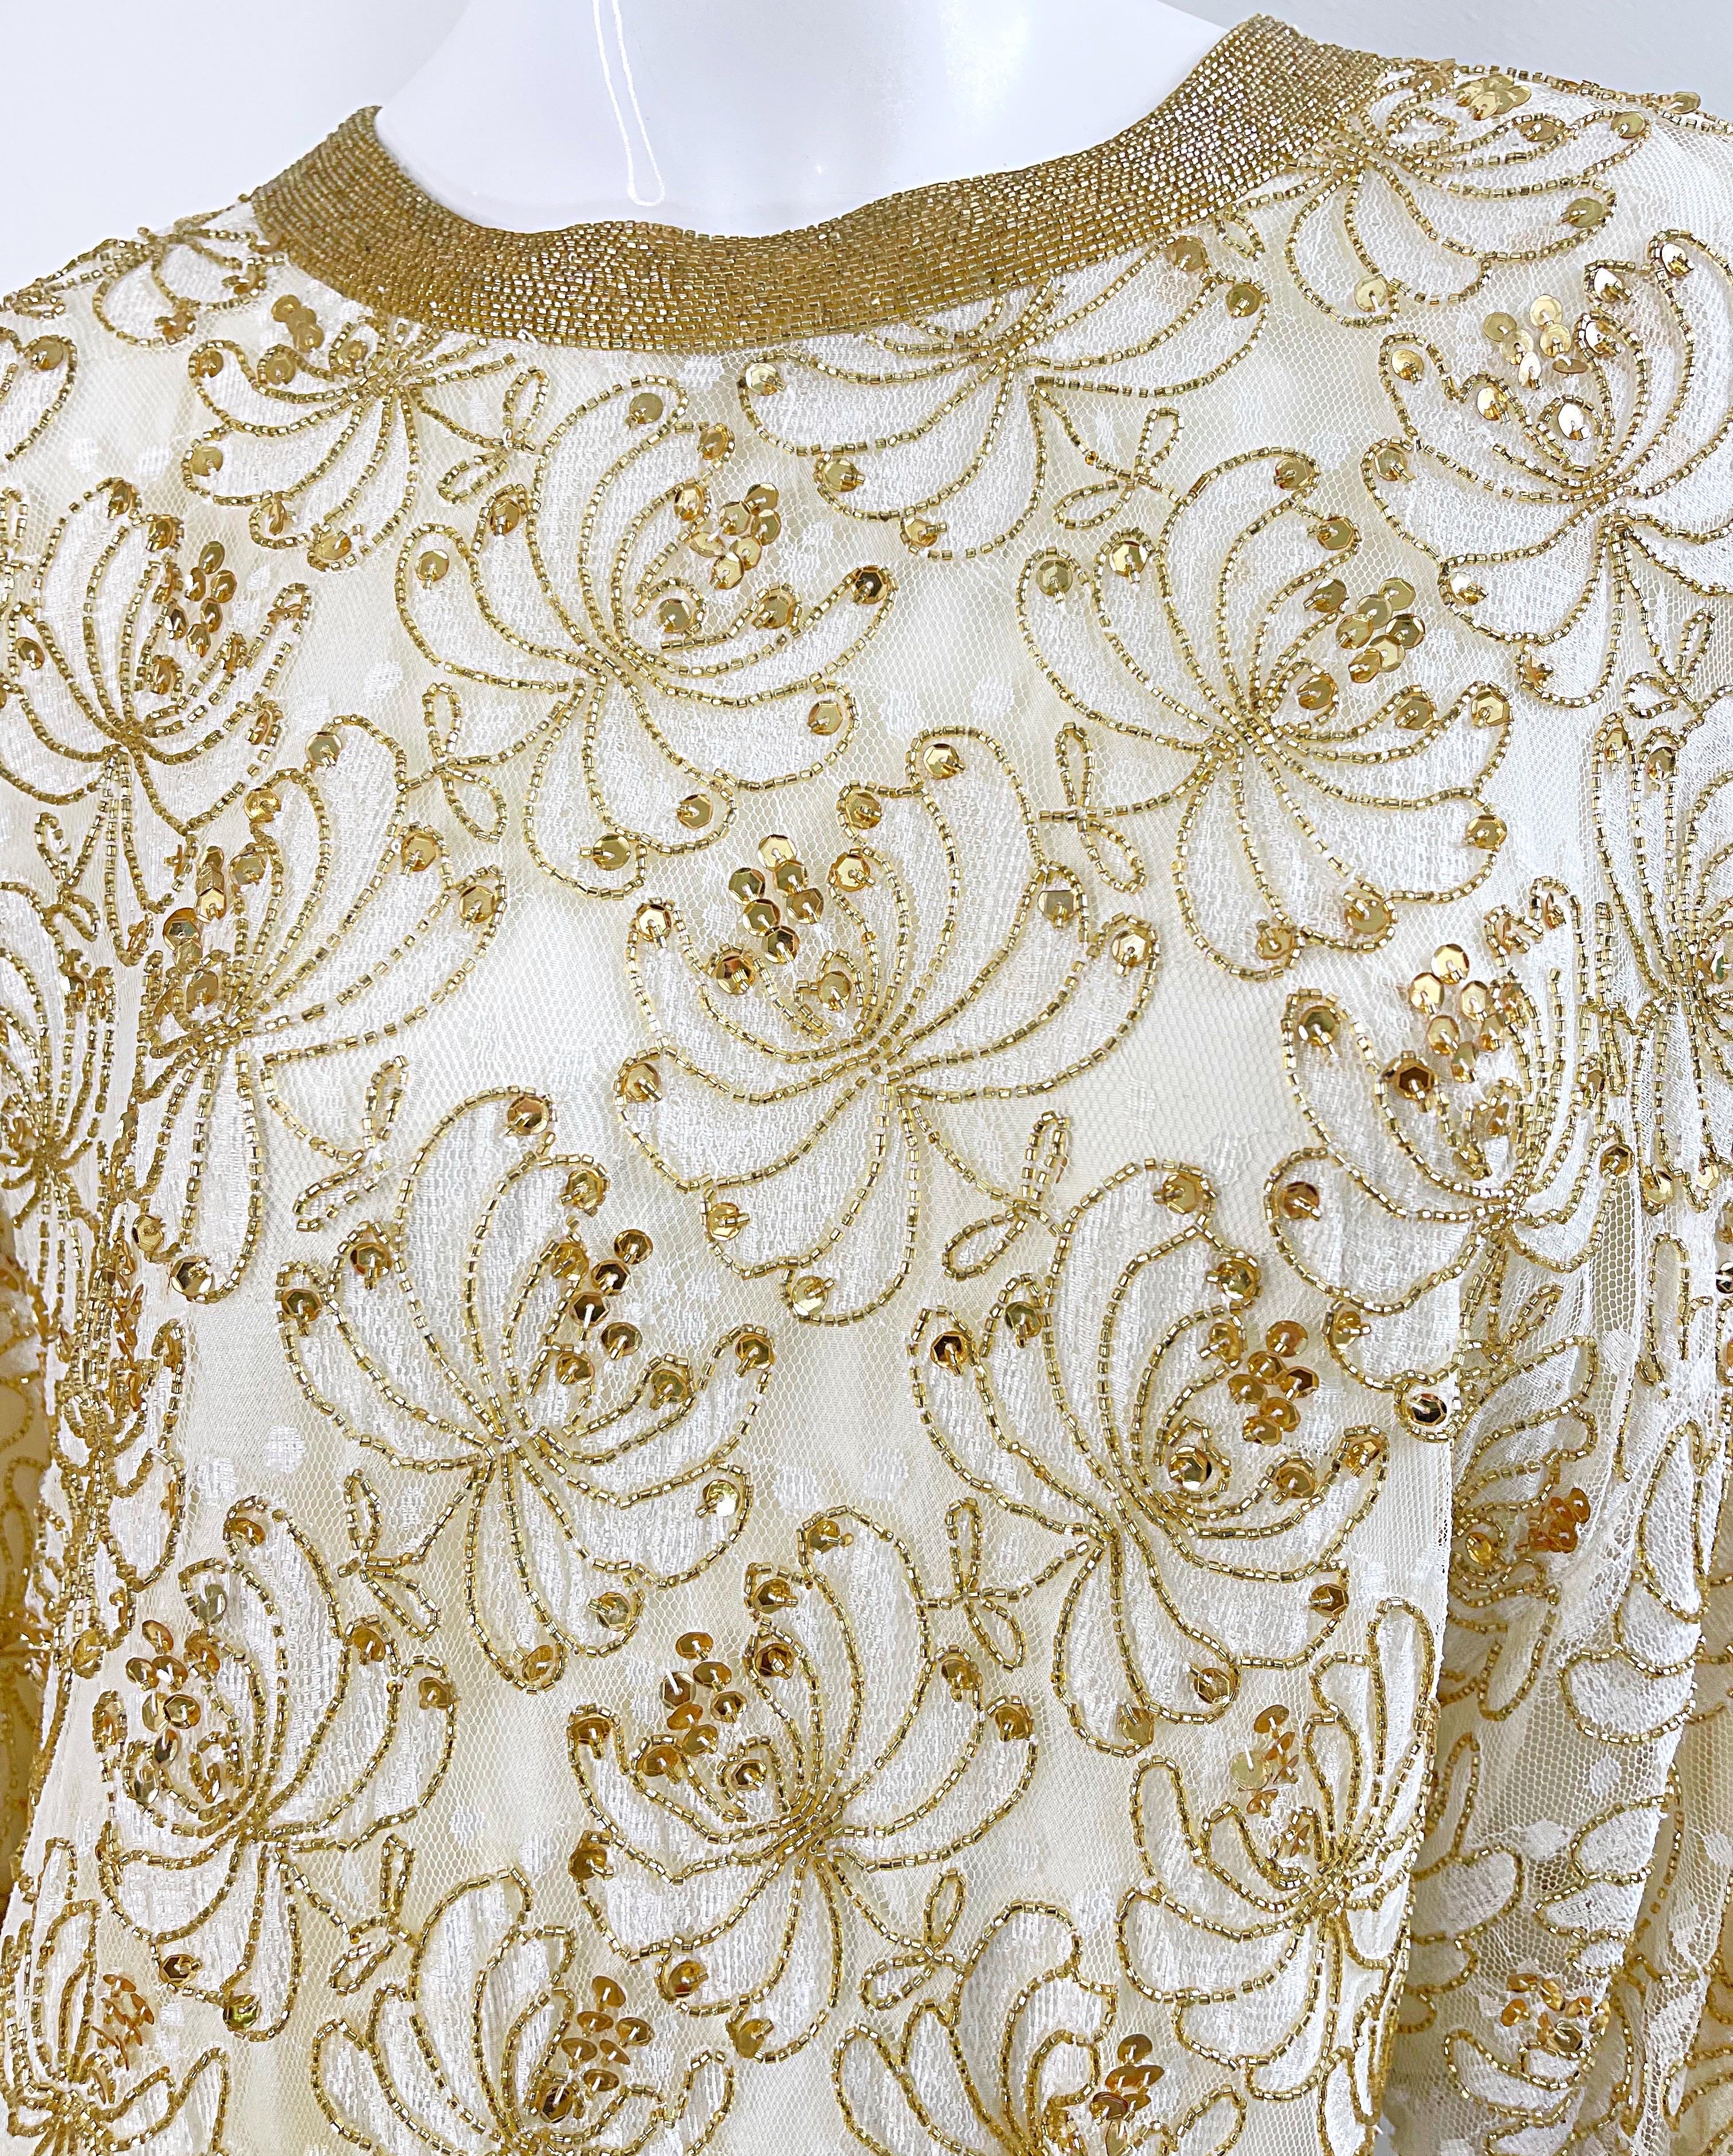 Women's Lillie Rubin 1980s Ivory Off White + Gold Lace Sequin Beaded Vintage 80s Dress For Sale